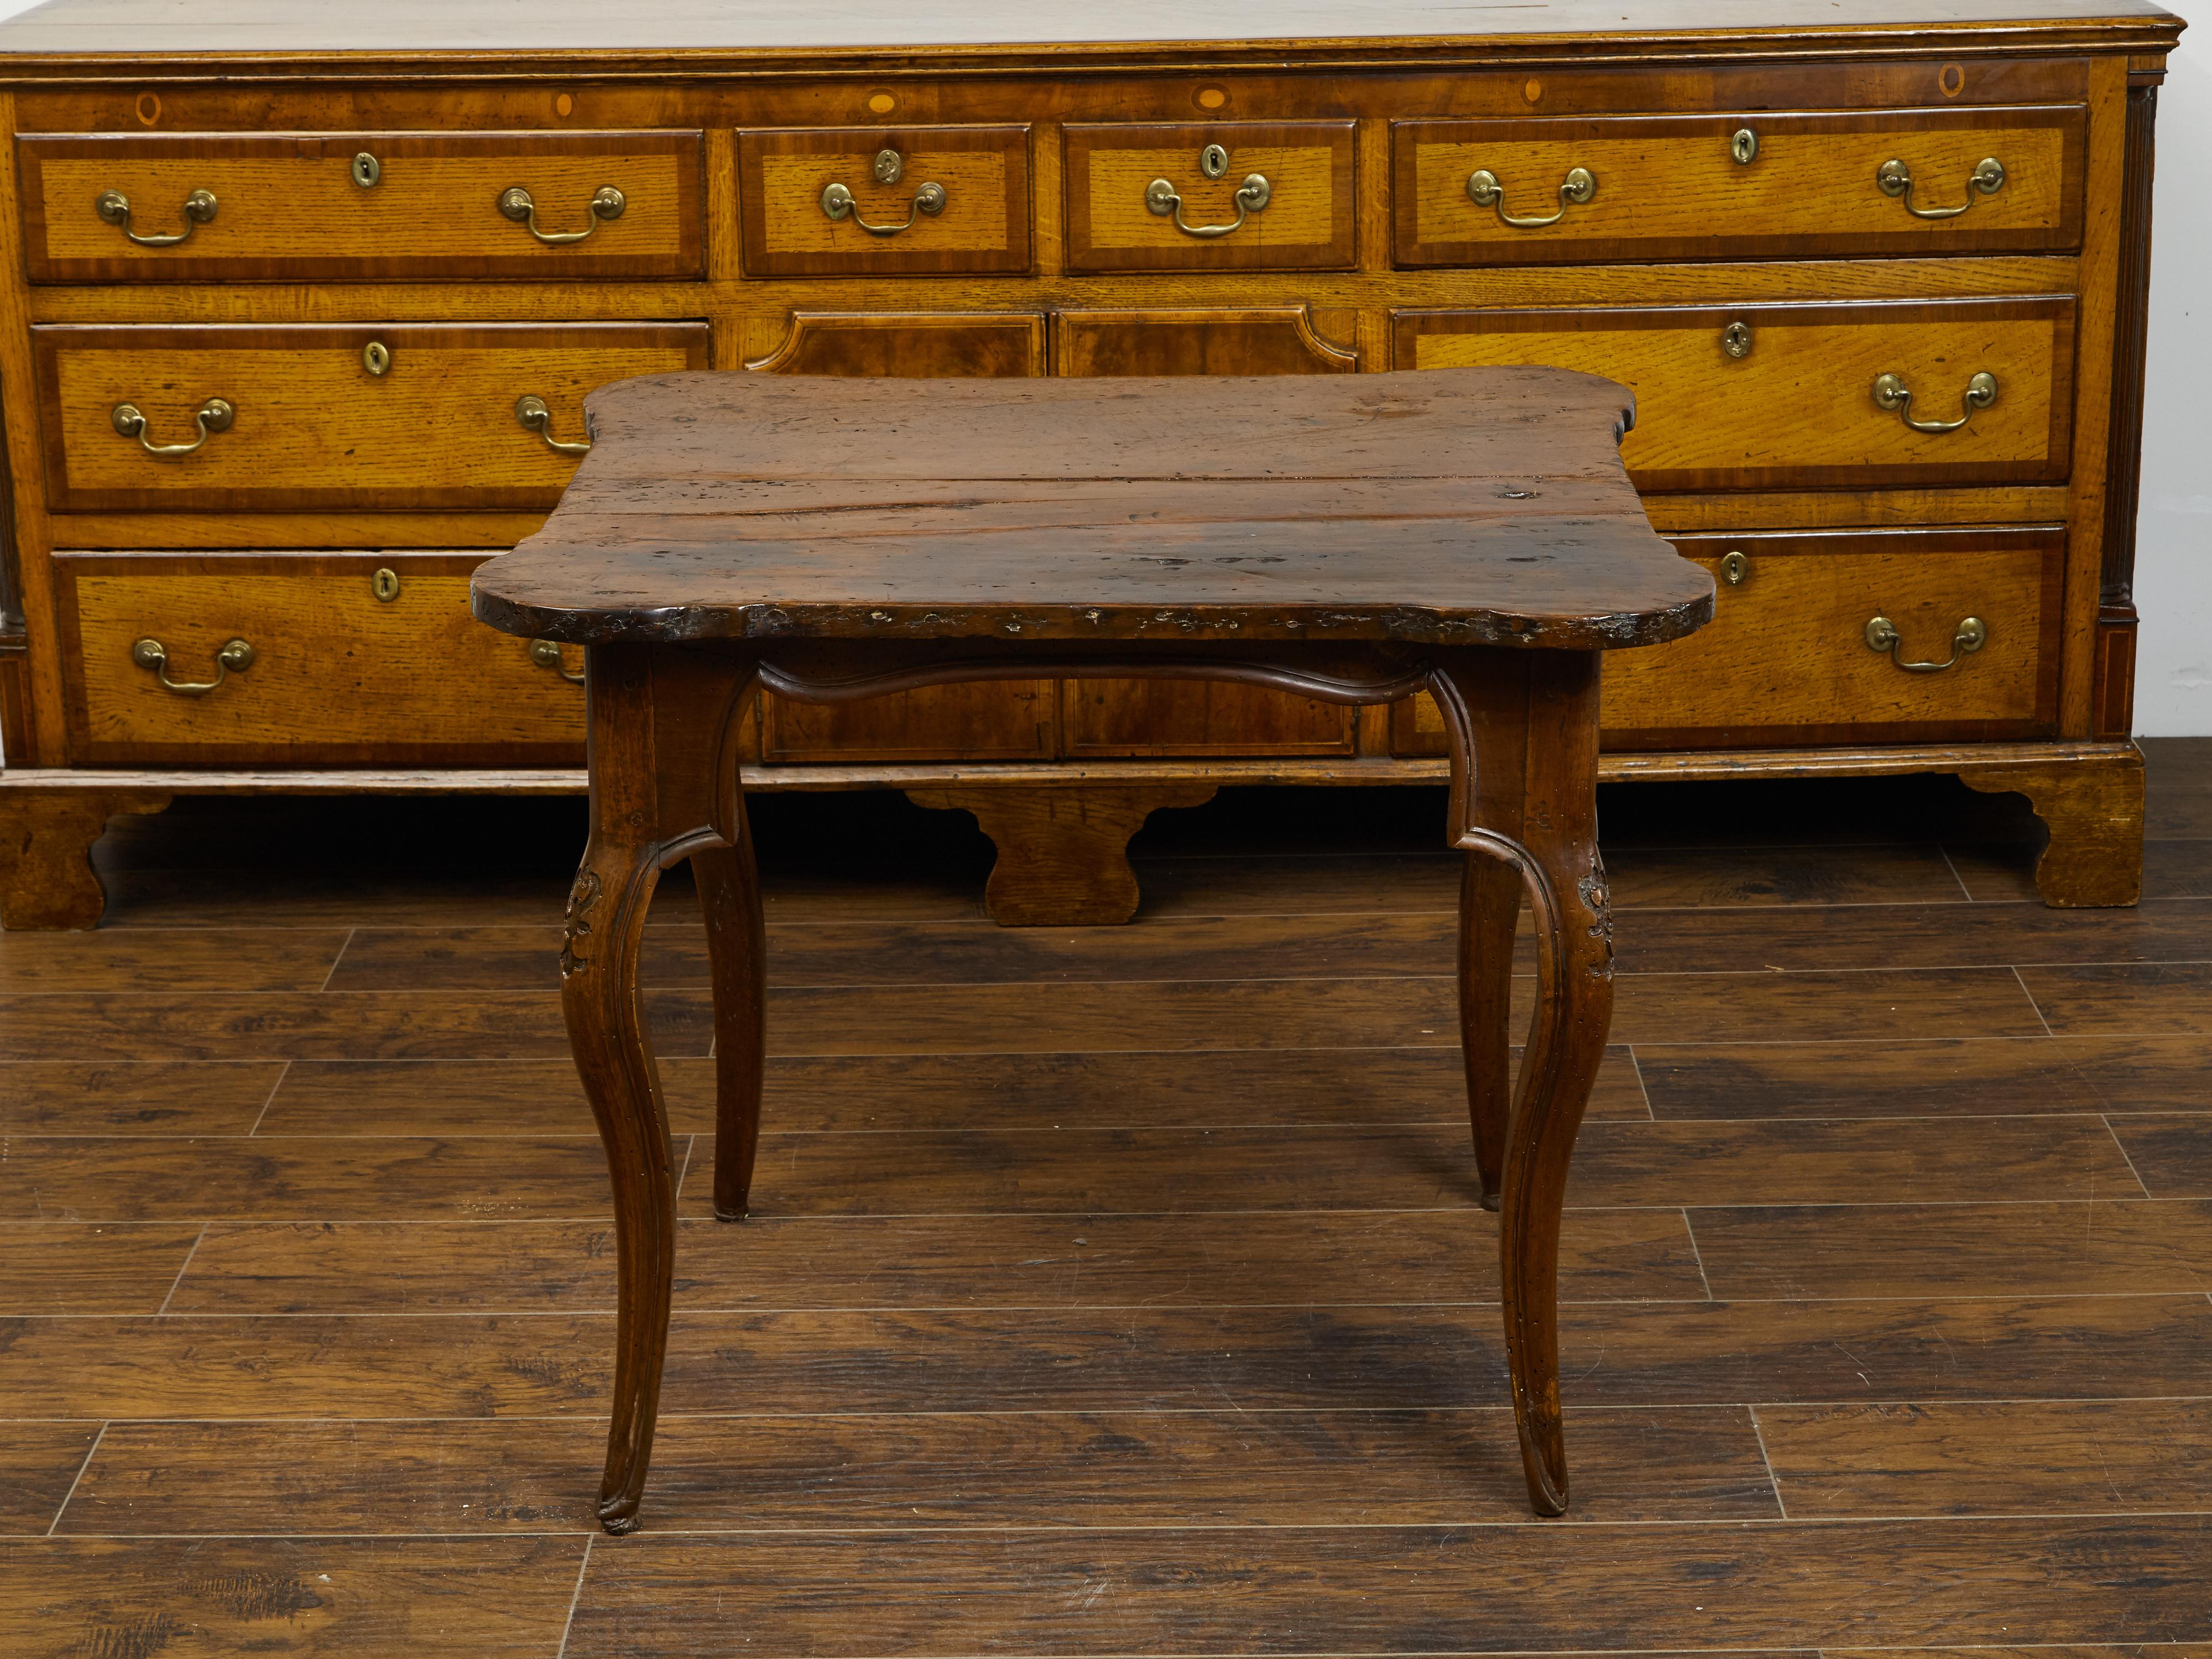 An Italian walnut side table from the early 19th century, with carved apron and cabriole legs. Created in Italy during the first decade of the 19th century, this walnut side table features a rectangular top with rounded corners, sitting above an